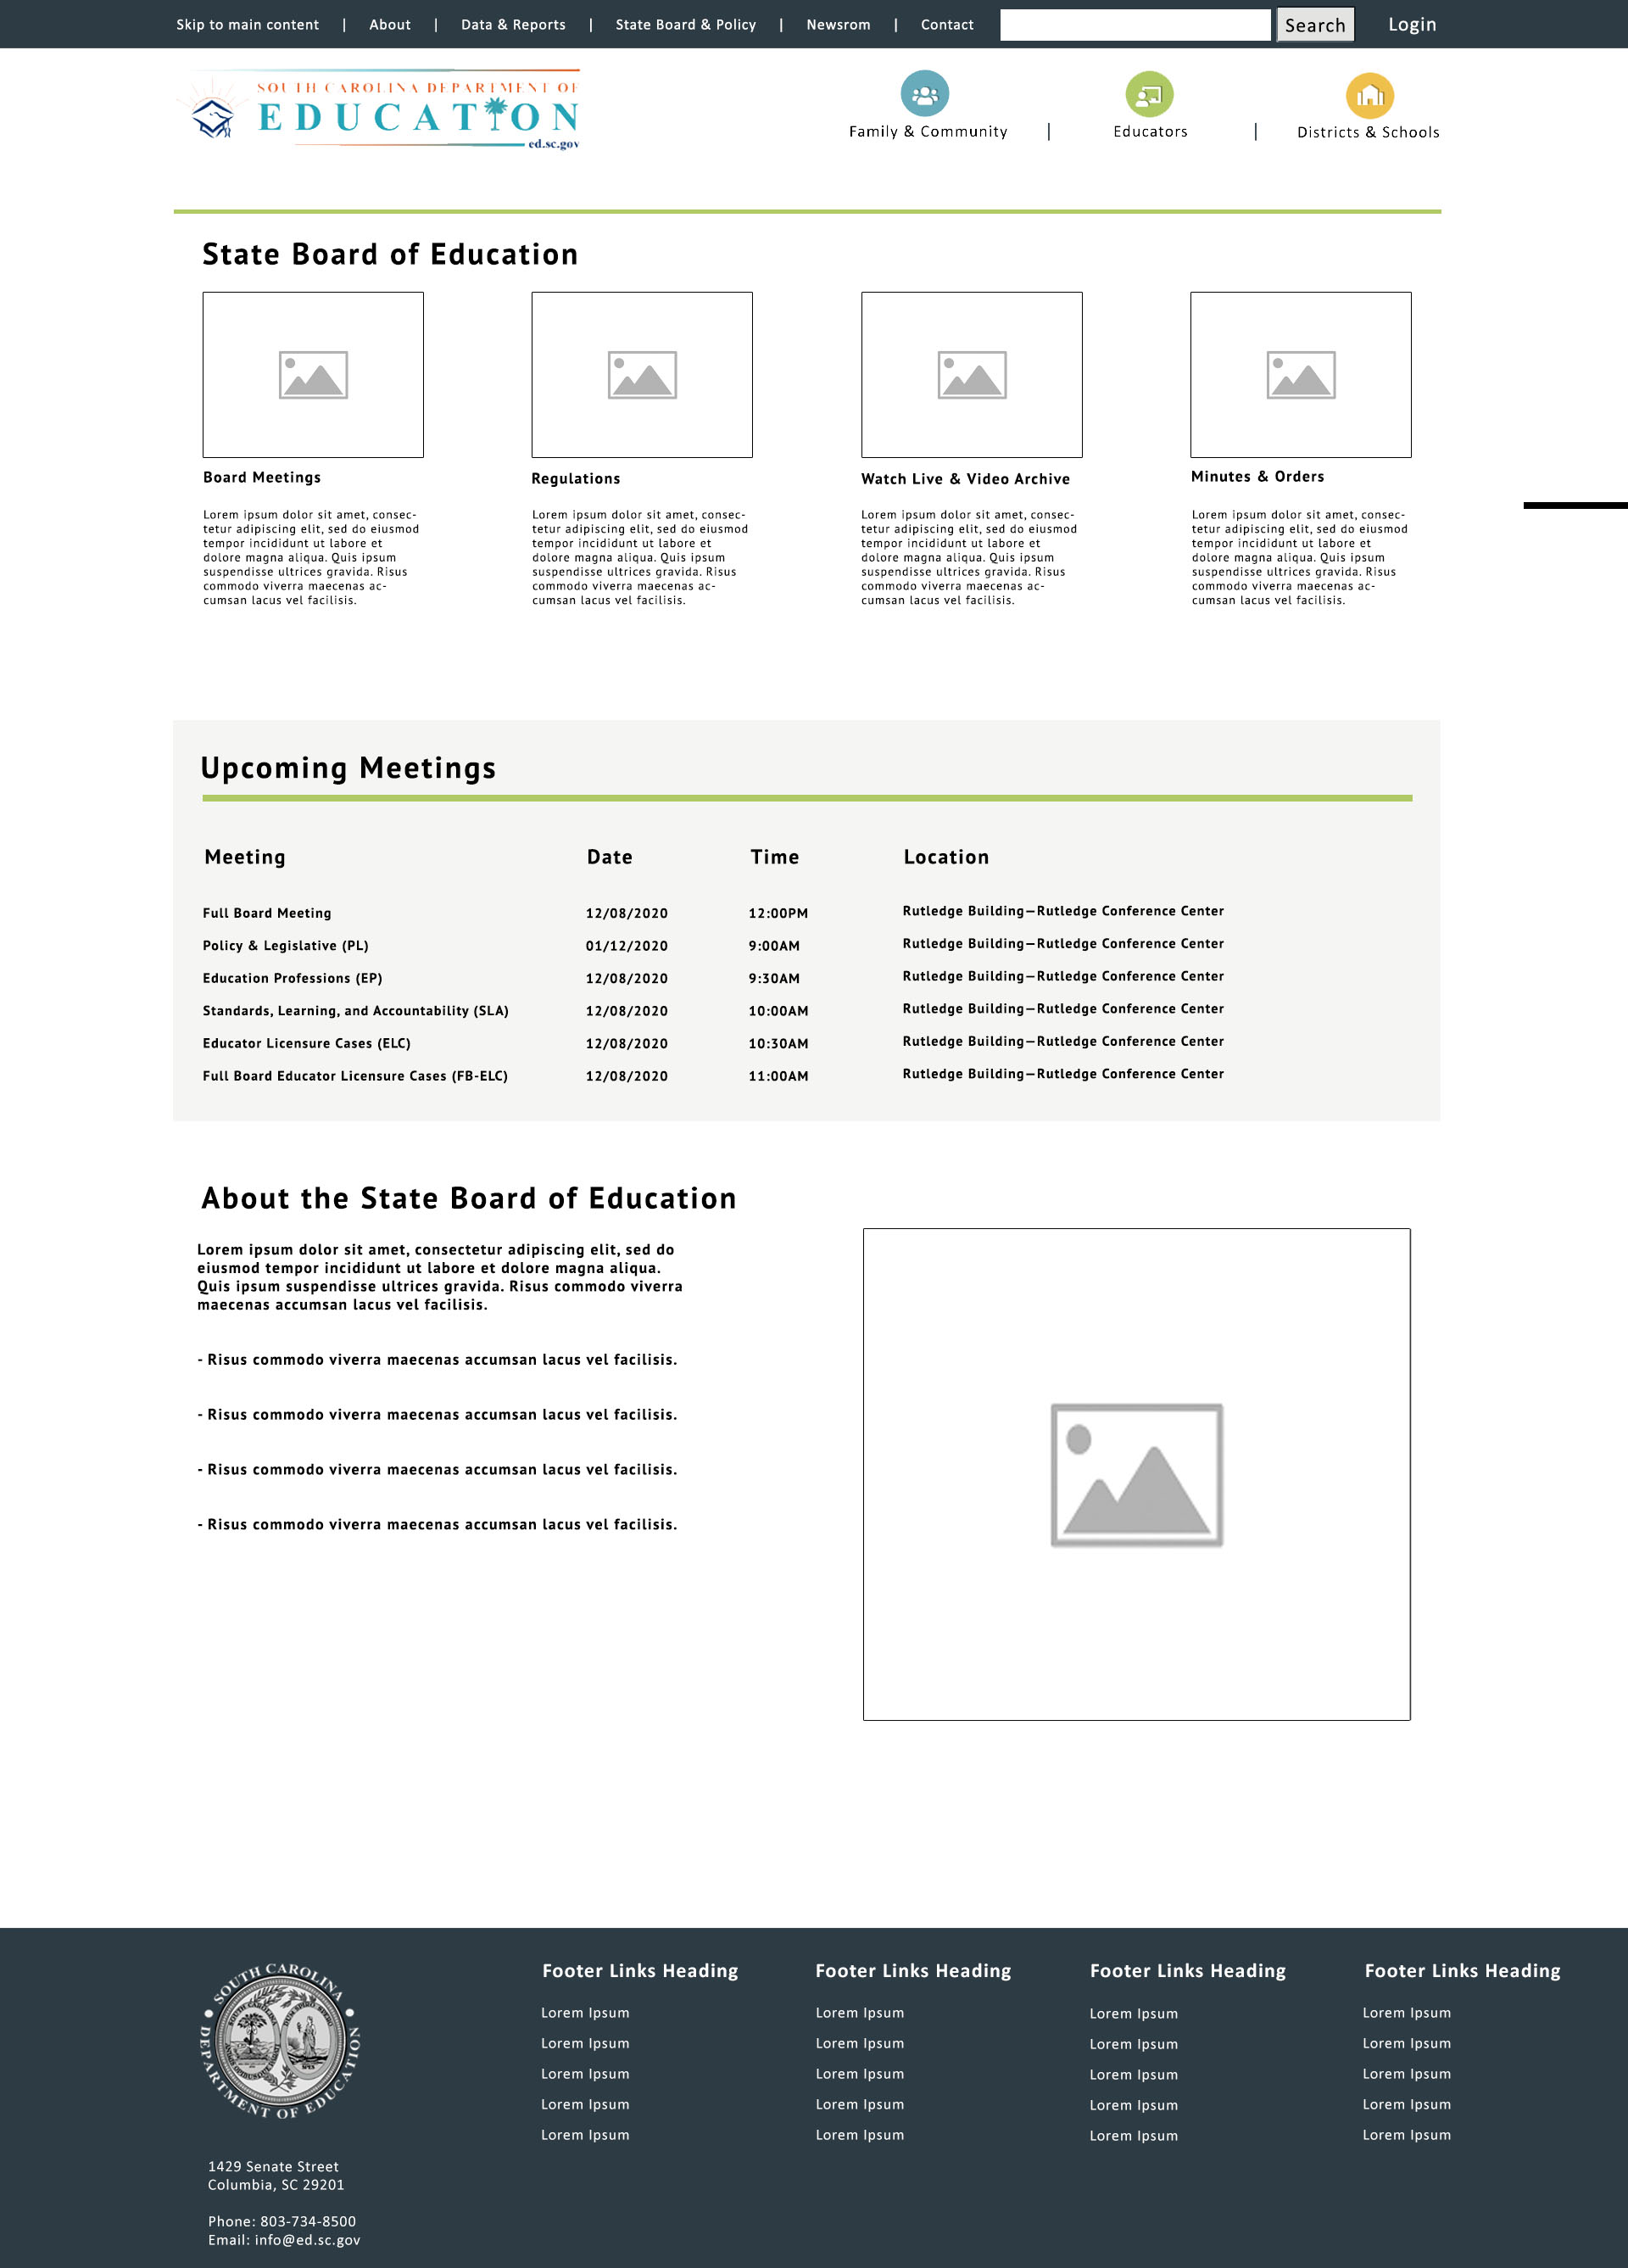 Wireframe created for SC Department of Education